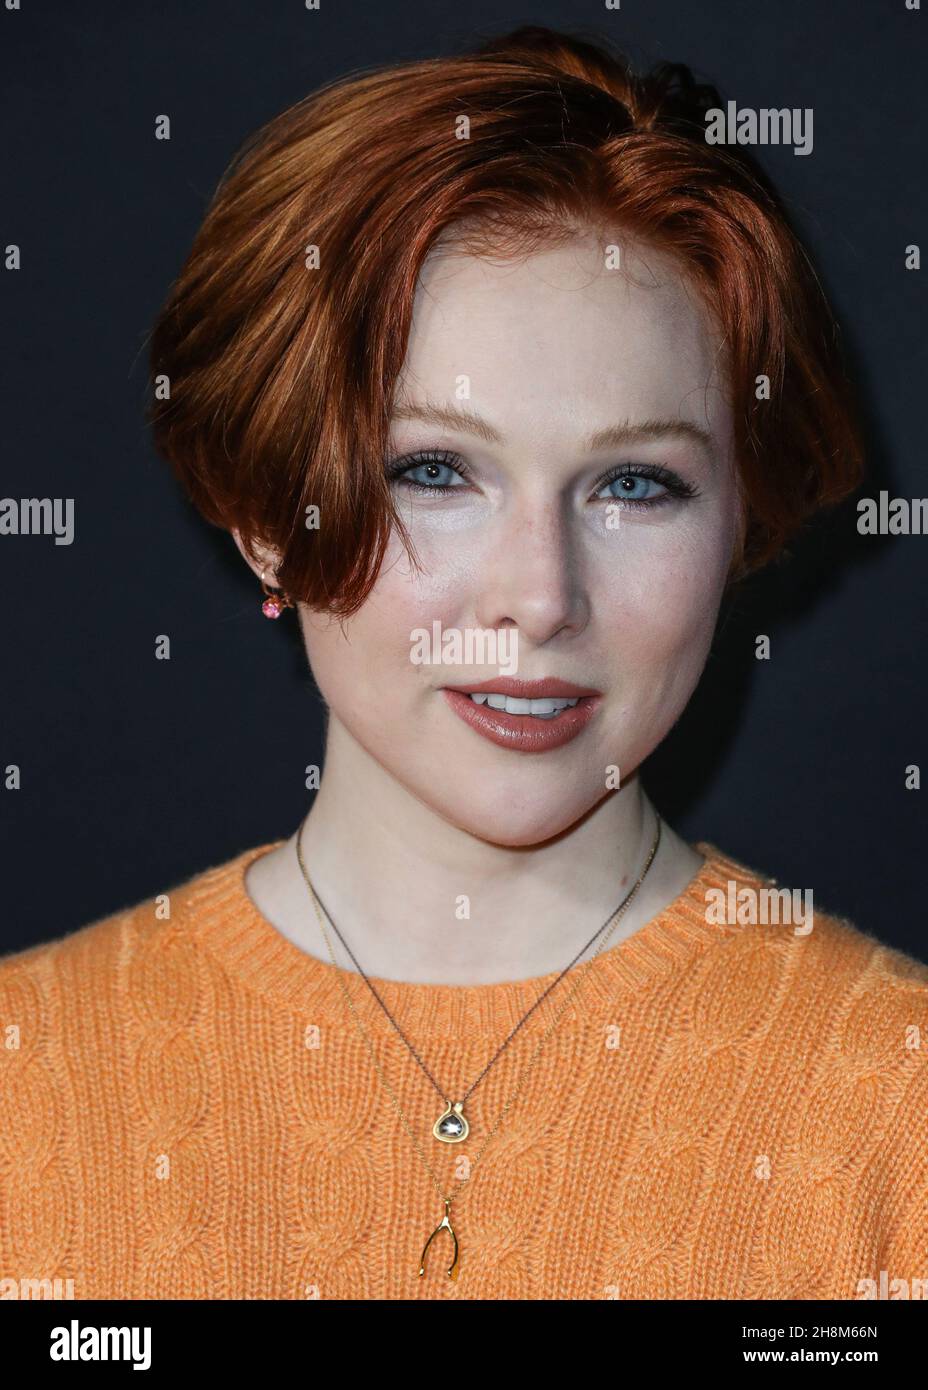 LOS ANGELES, CALIFORNIA, USA - NOVEMBER 30: Actress Molly C. Quinn arrives at the Los Angeles Premiere Of Netflix's 'The Unforgivable' held at the Directors Guild of America Theater on November 30, 2021 in Los Angeles, California, United States. (Photo by Xavier Collin/Image Press Agency) Stock Photo